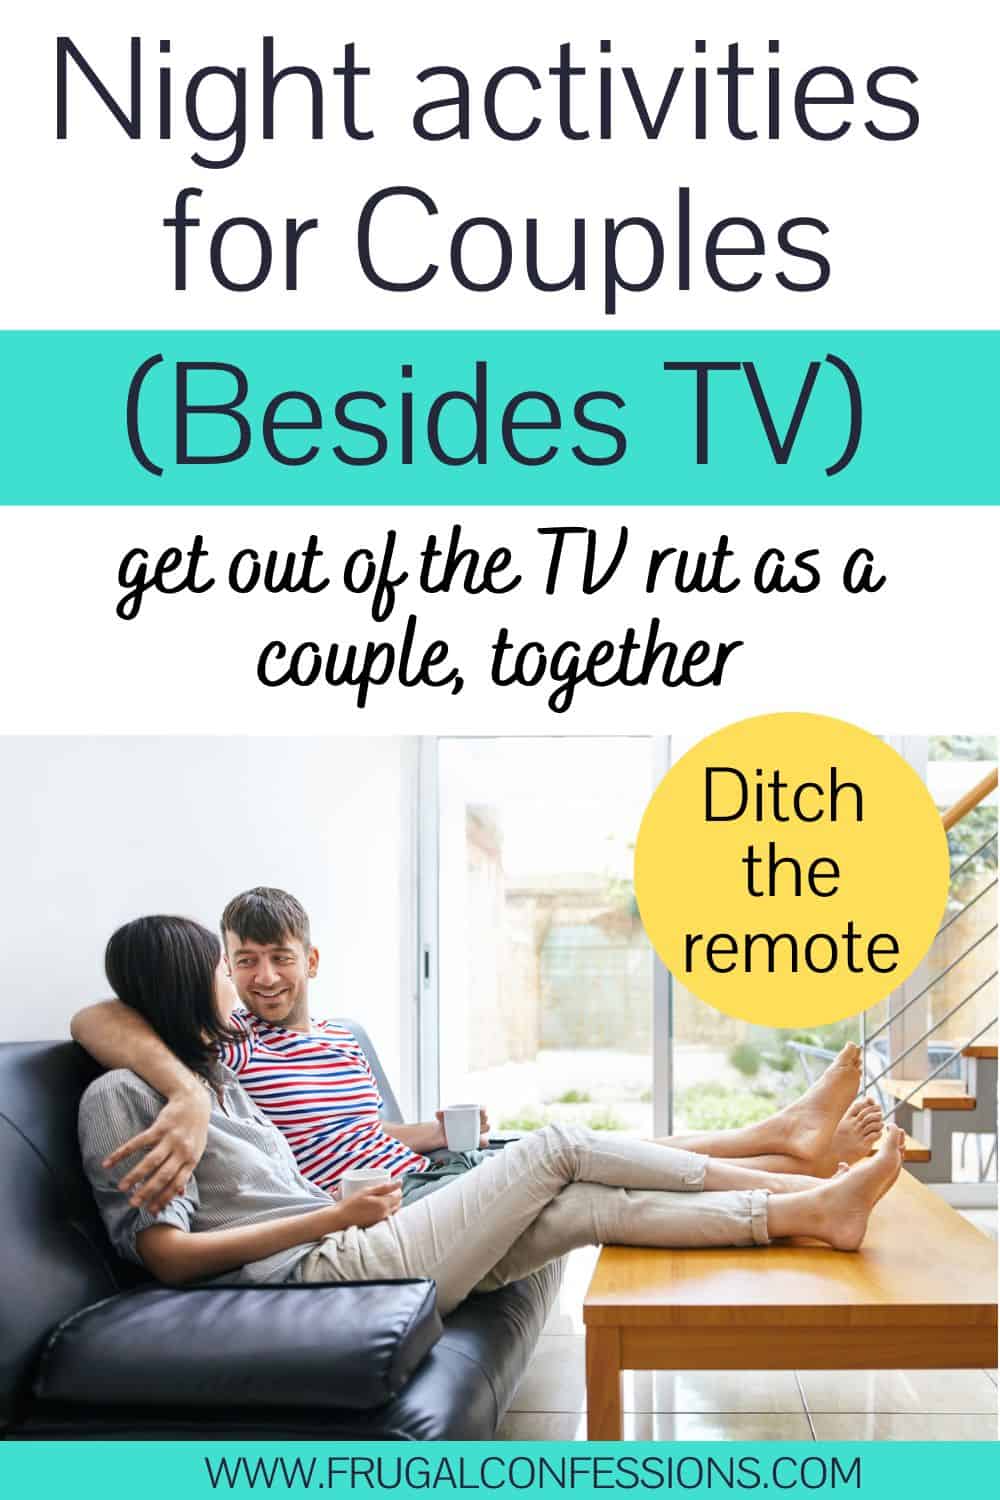 couple with arm around each other on couch, no TV, text overlay "nice activities for couples besides TV"